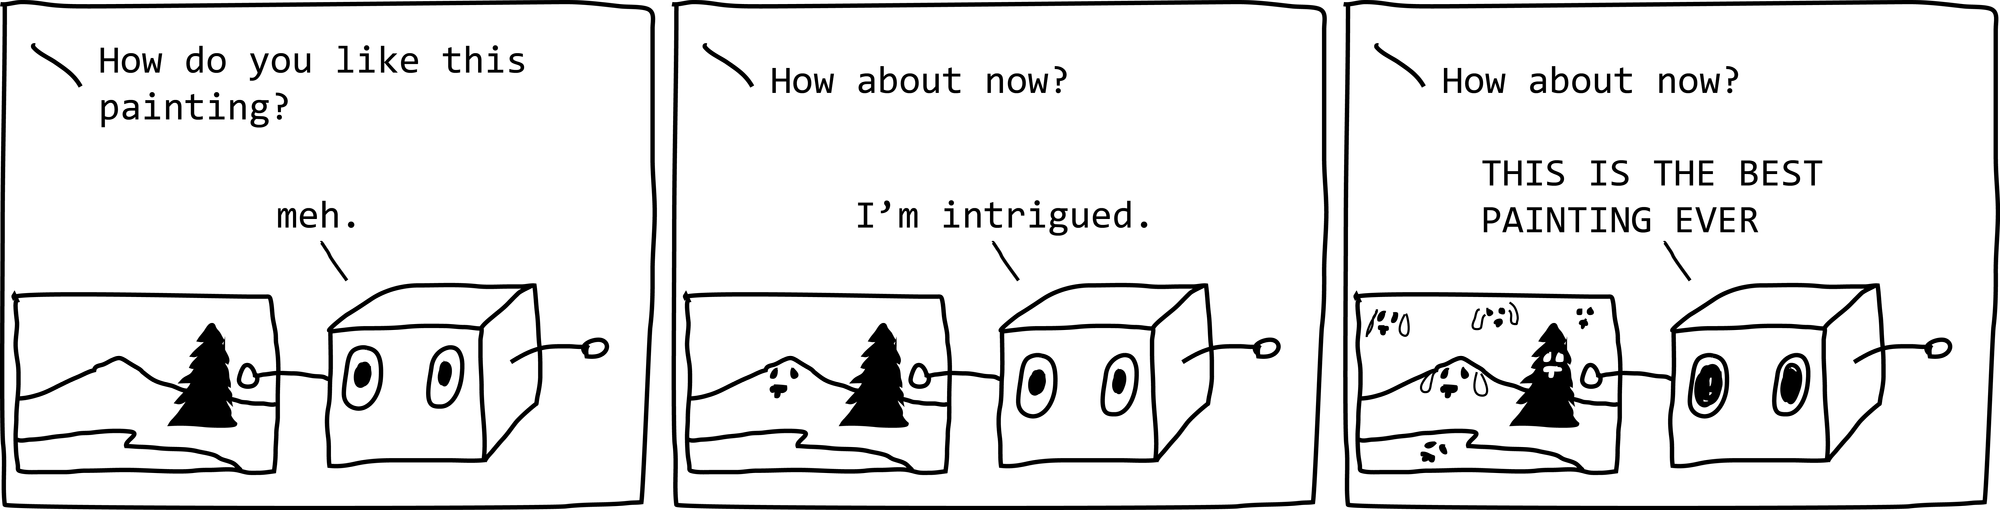 First panel: Voice: "How do you like this painting?" Painting is of a single pine tree by a lake with a mountain. Robot box: "Meh." Second panel: Voice: "How about now?" The mountain now has a dog face. Robot box: "I'm intrigued." Third panel: Voice: "How about now?" Sky, lake, and pine tree all have dog faces. Robot box: "THIS IS THE BEST PAINTING EVER!"